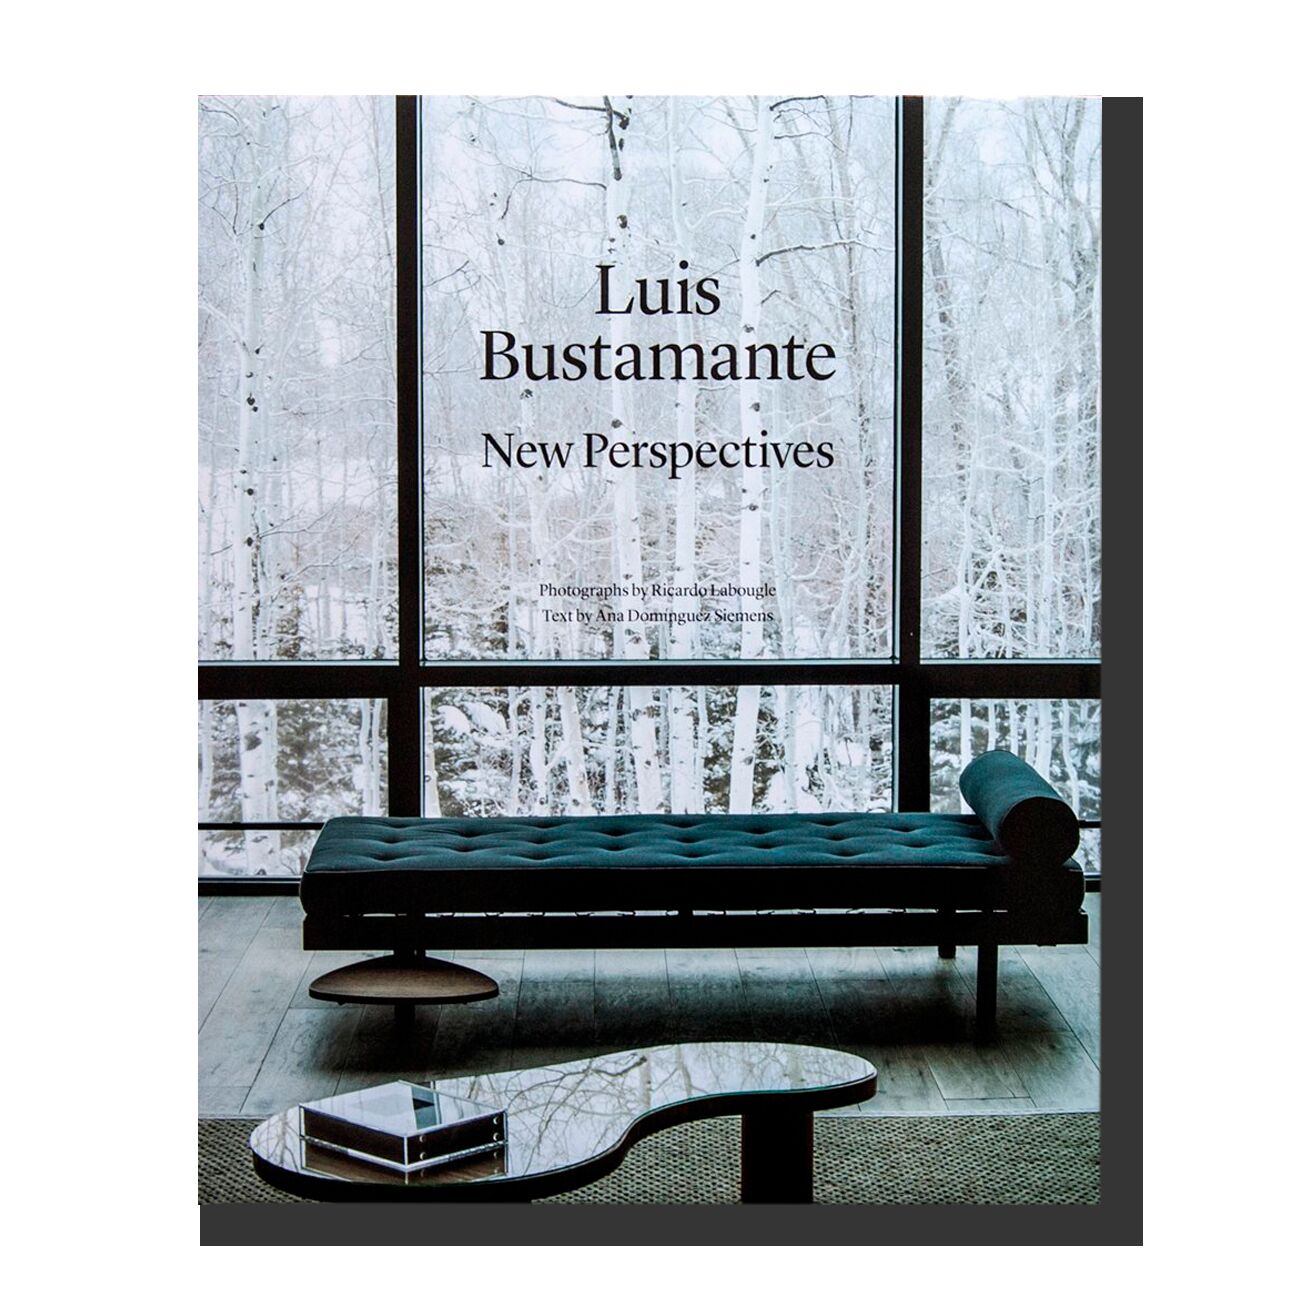 Luis Bustamante: New Perspectives